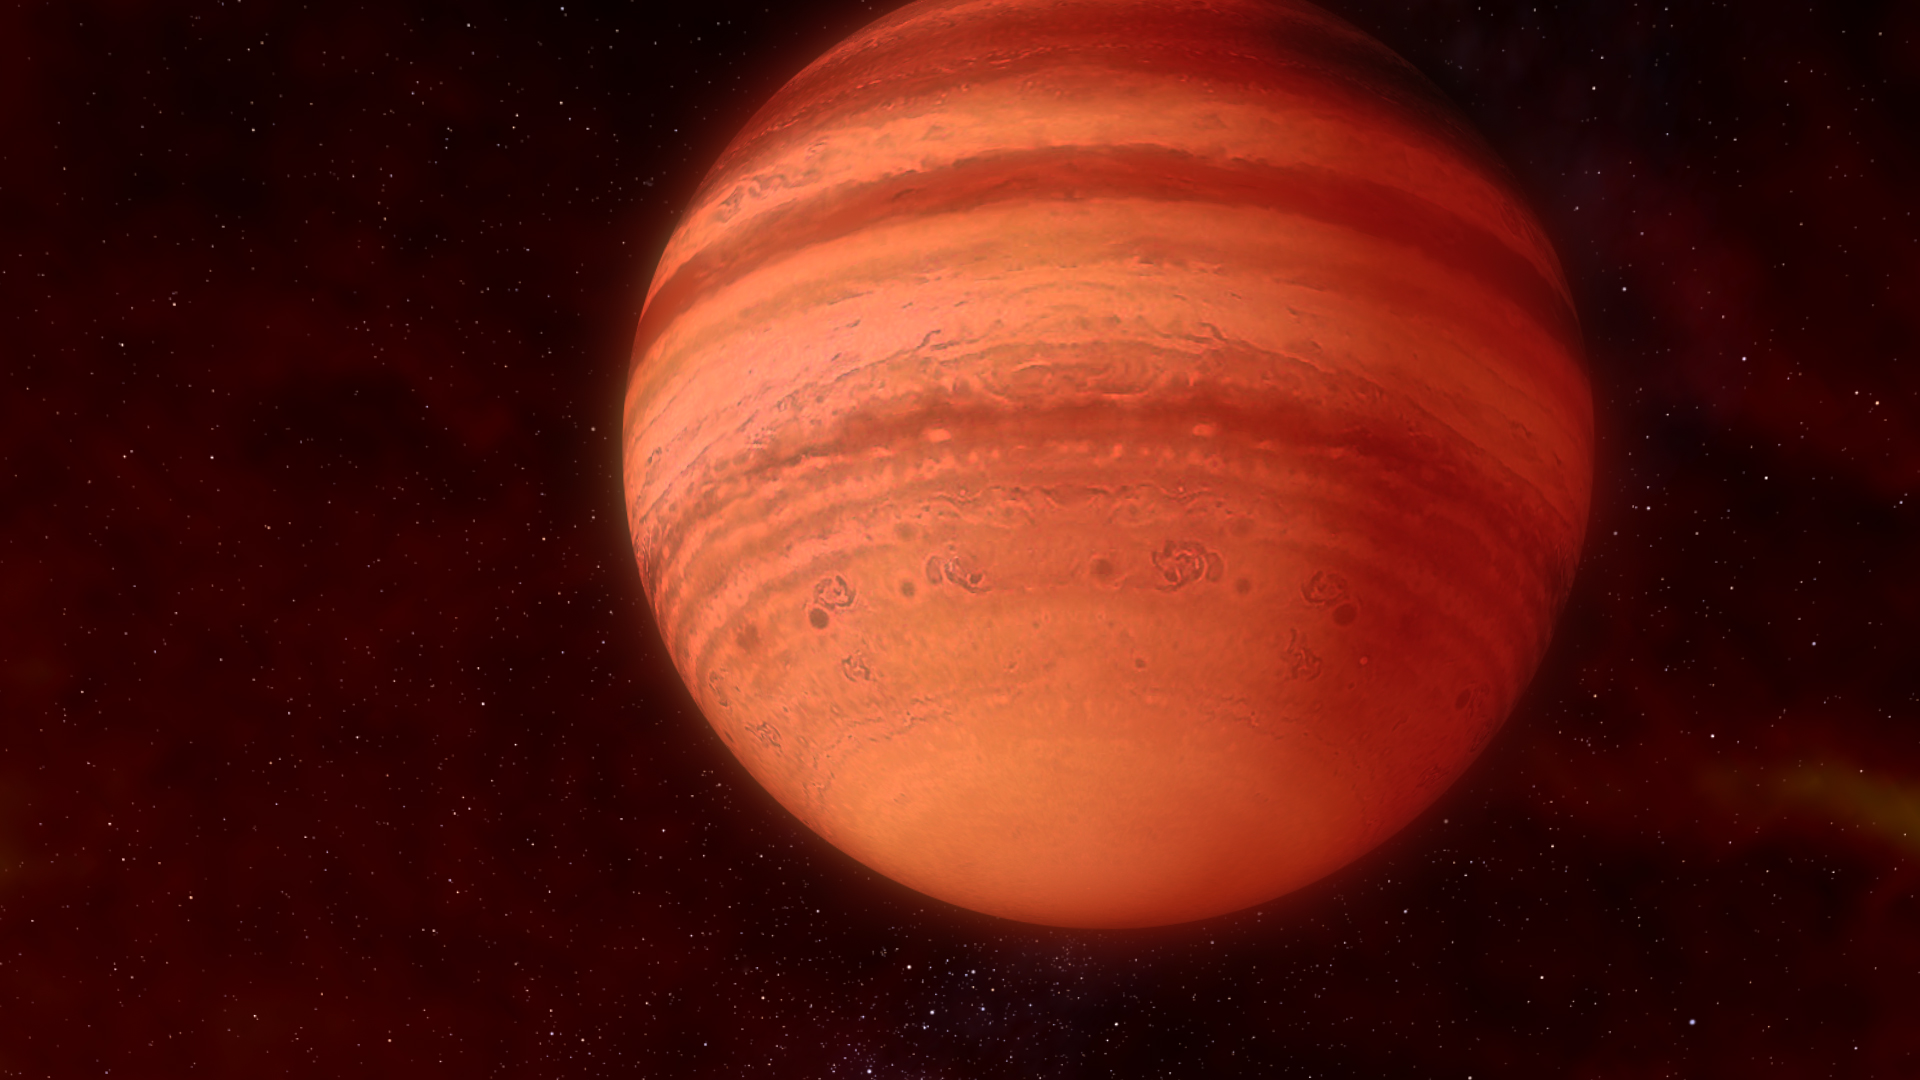 Wasp 33b is an "Ultrahot Jupiter" with aluminumoxide in it's atmosphere